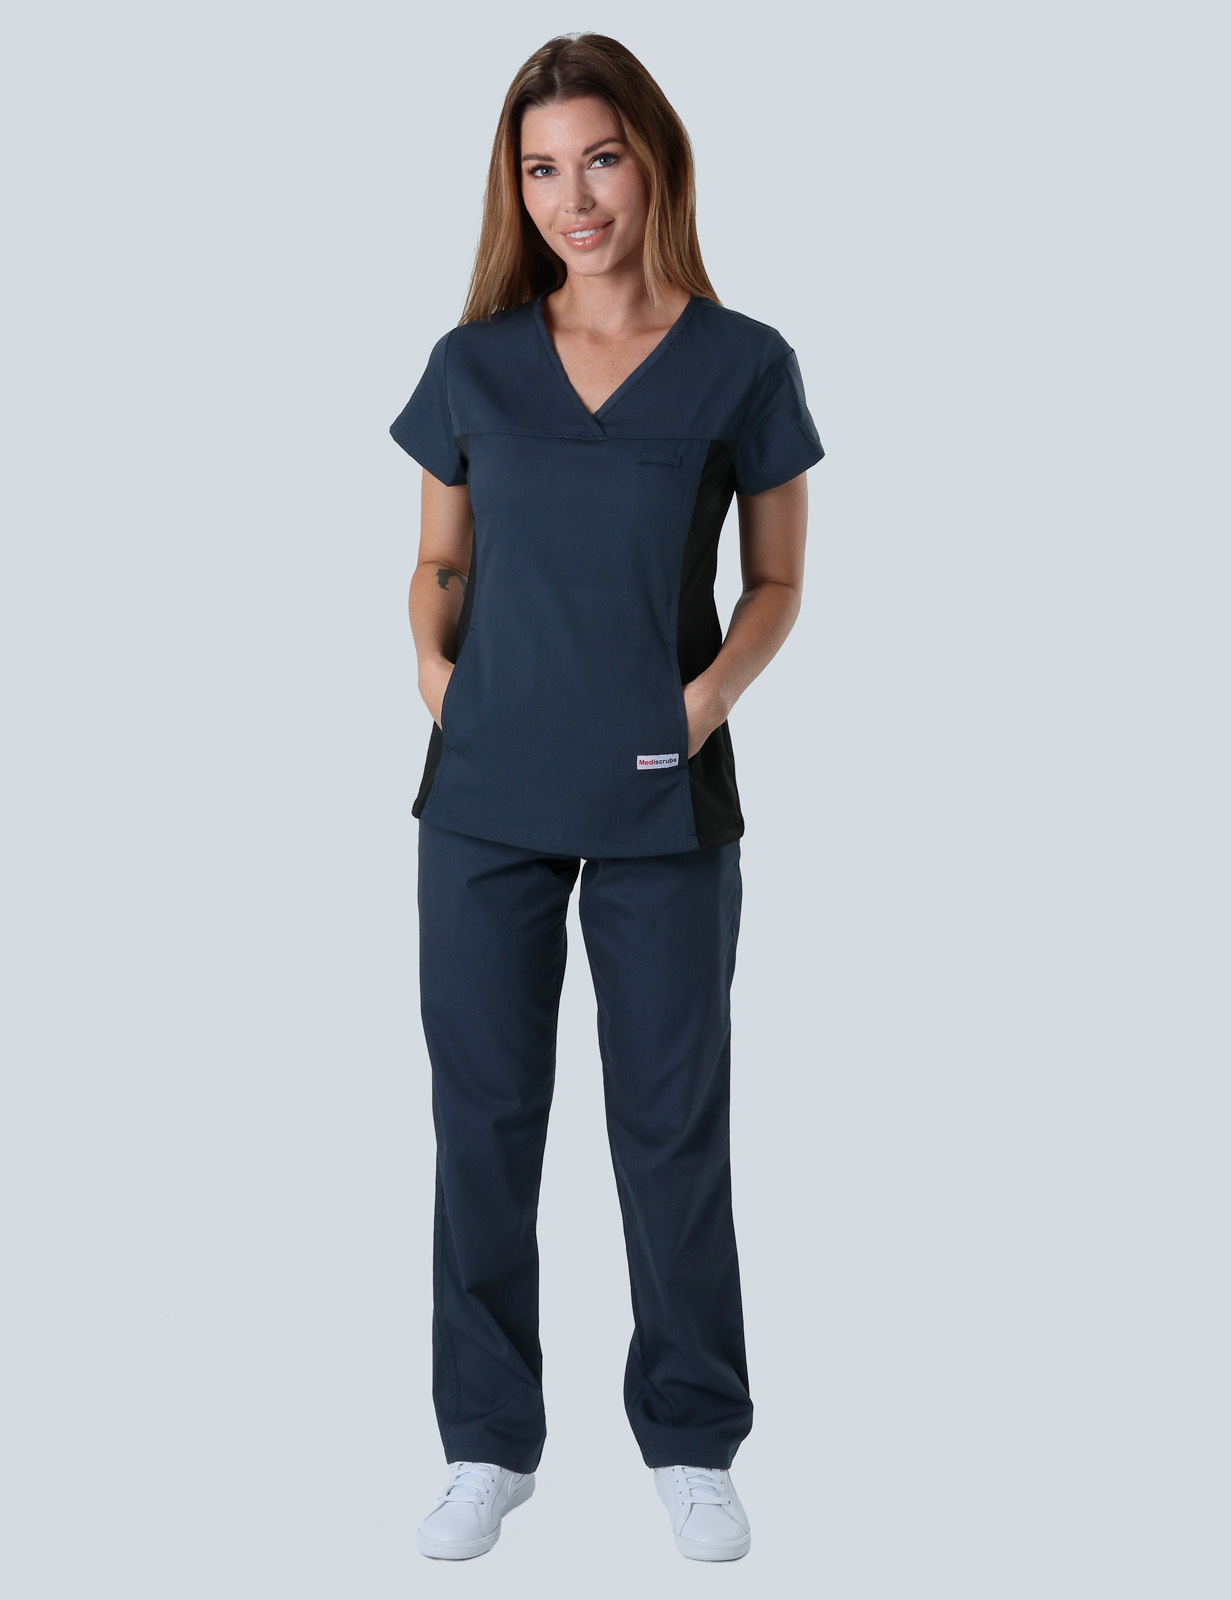 Women's Fit Solid Scrub Top With Spandex Panel - Navy - X Small